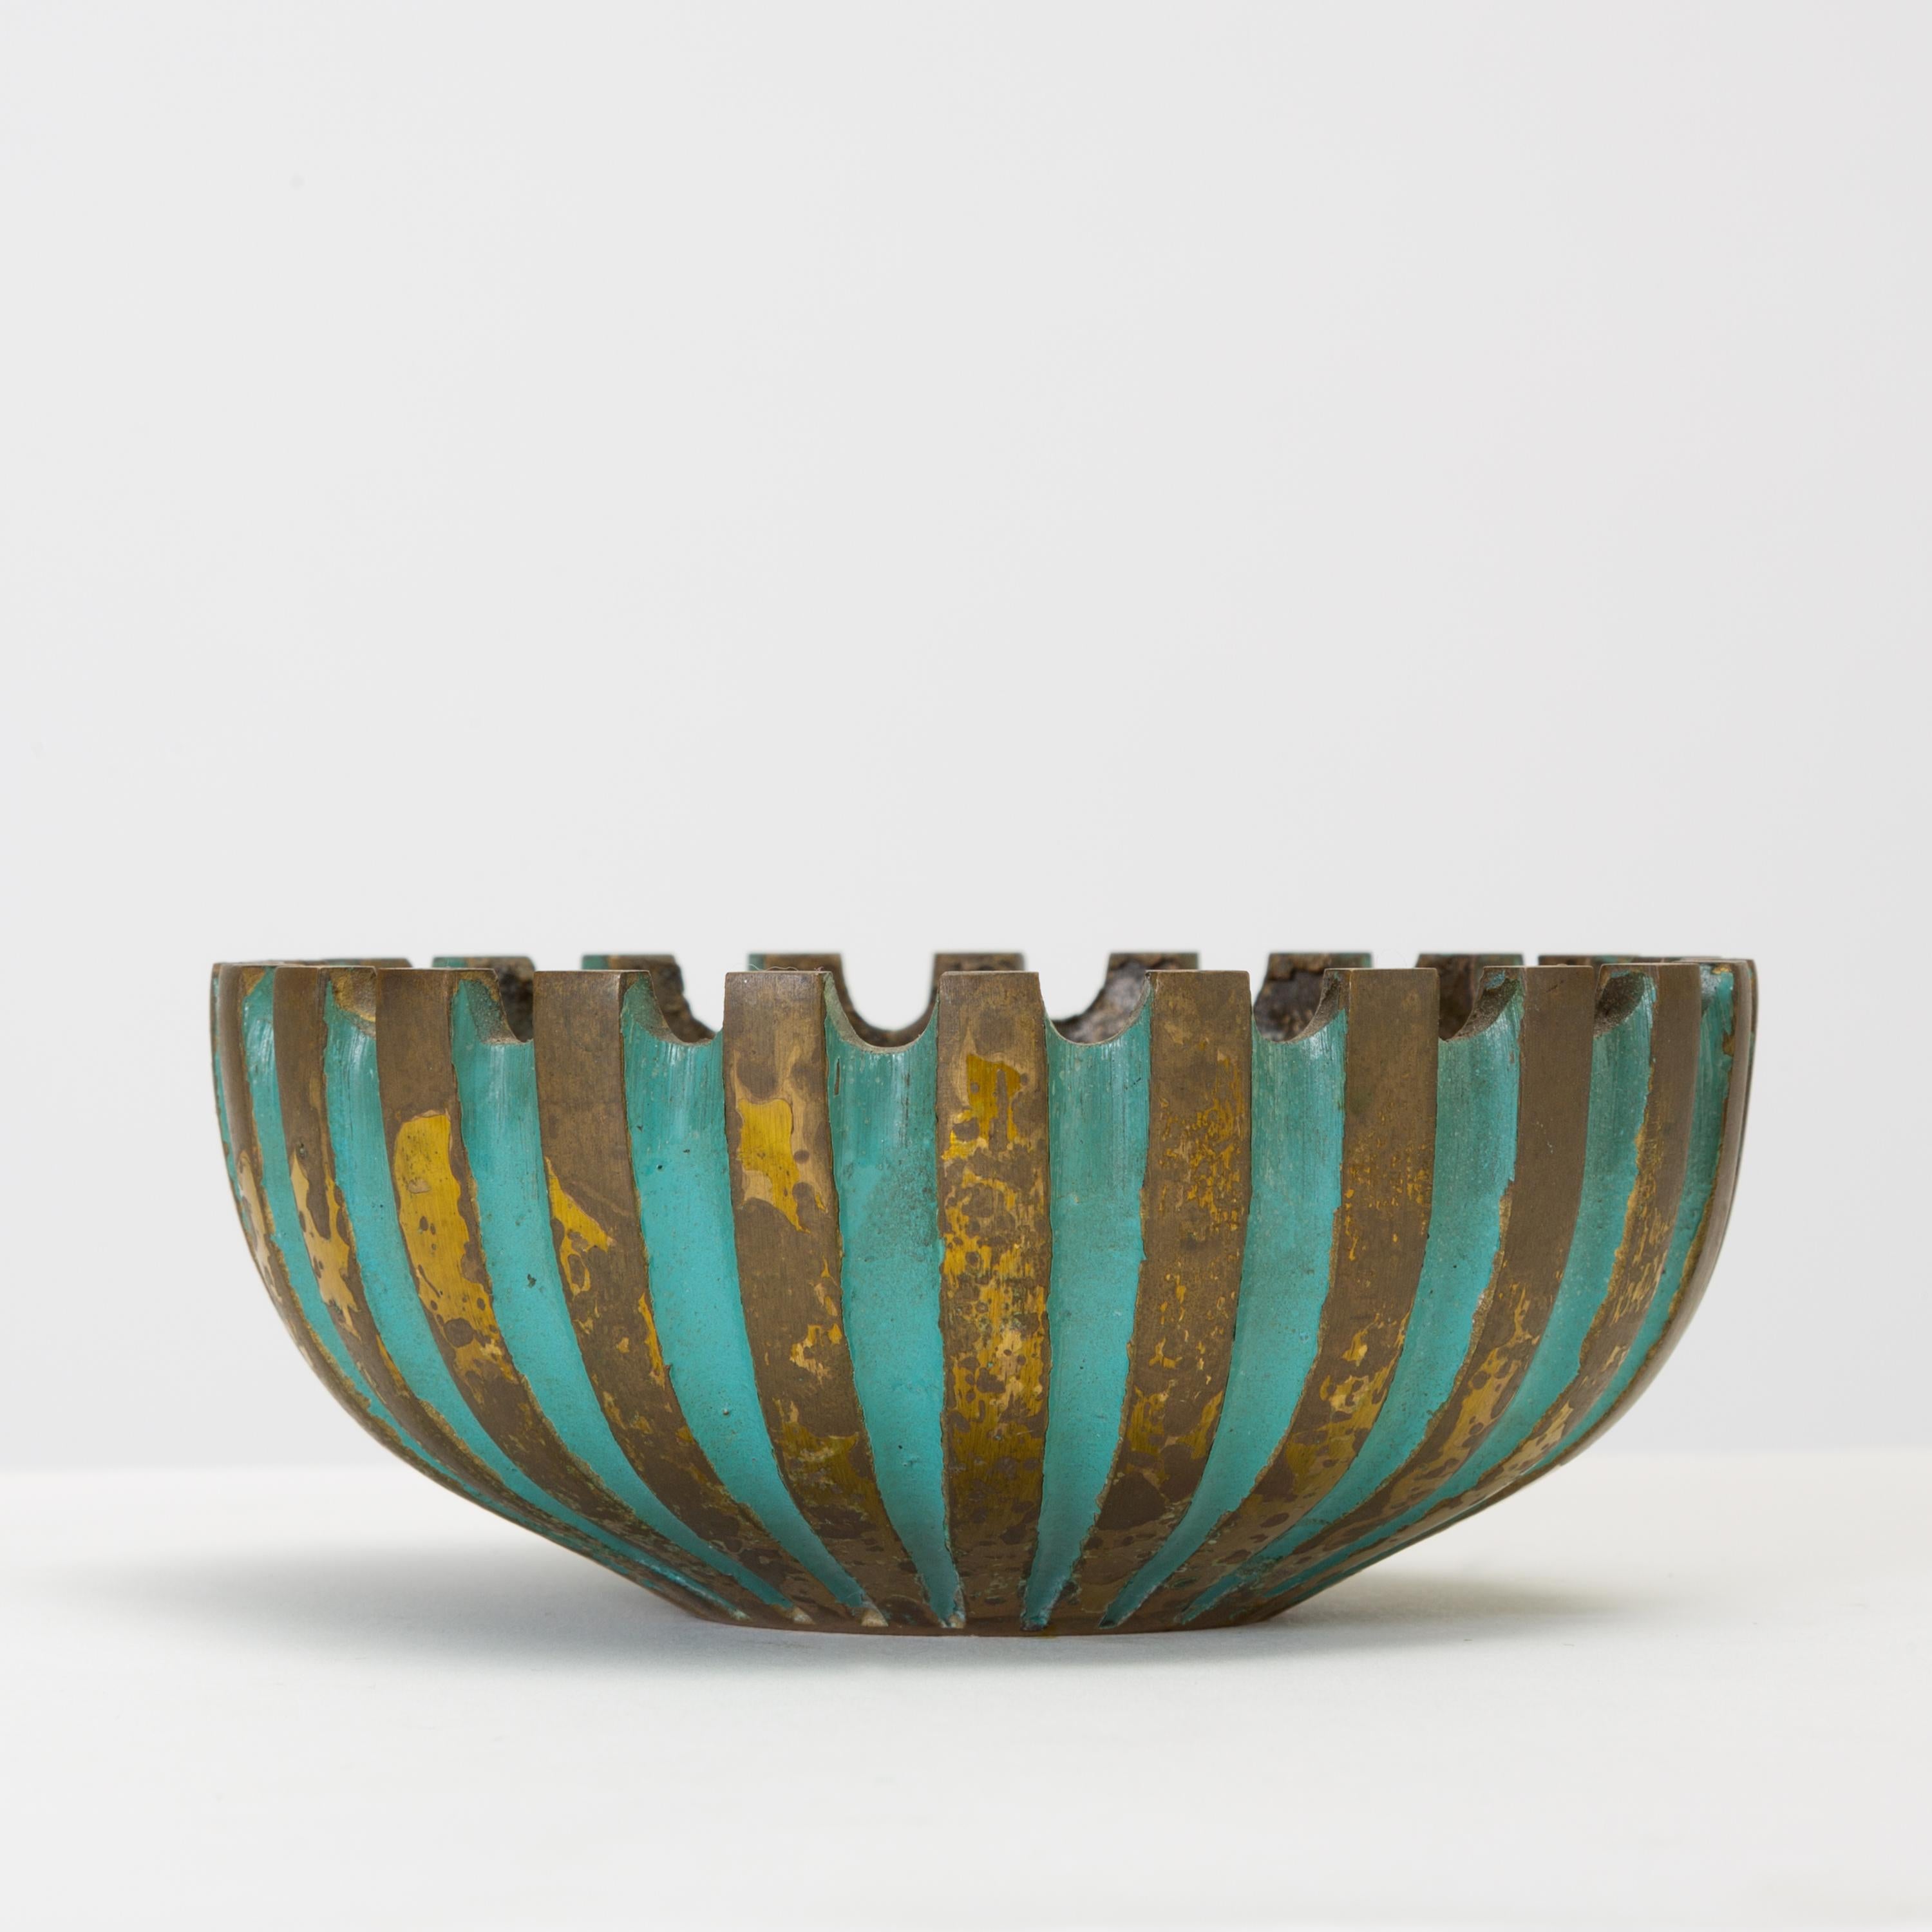 20th Century Cast Bronze Ashtray with Verdigris Finish by Oppenheim